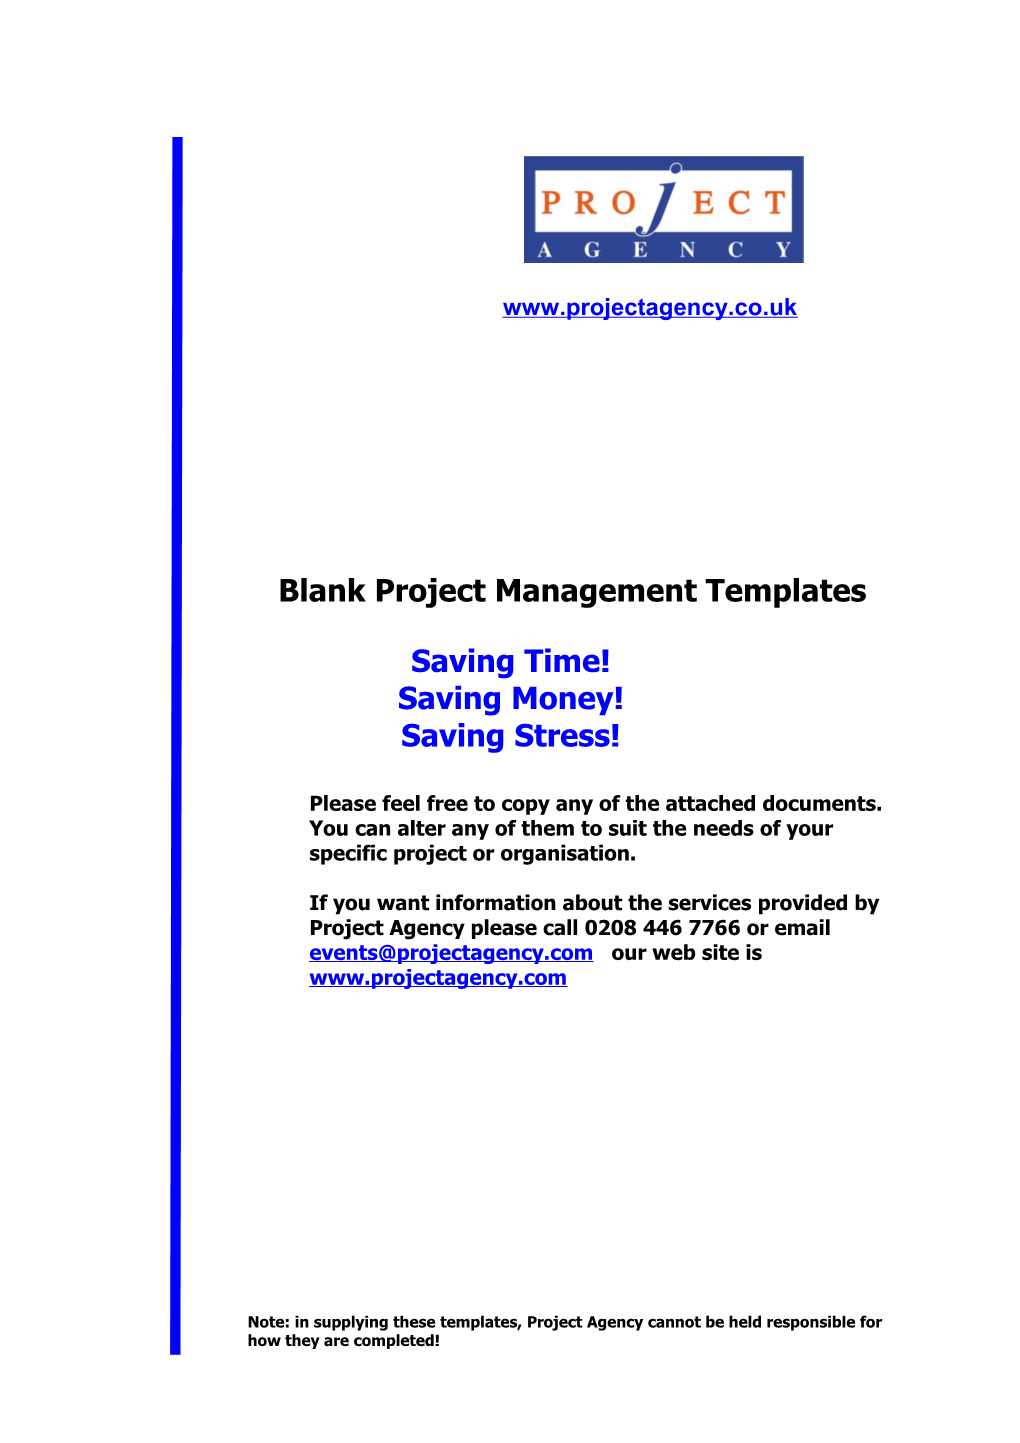 Project Management Templates from Project Agency Please Alter to Suit Your Needs